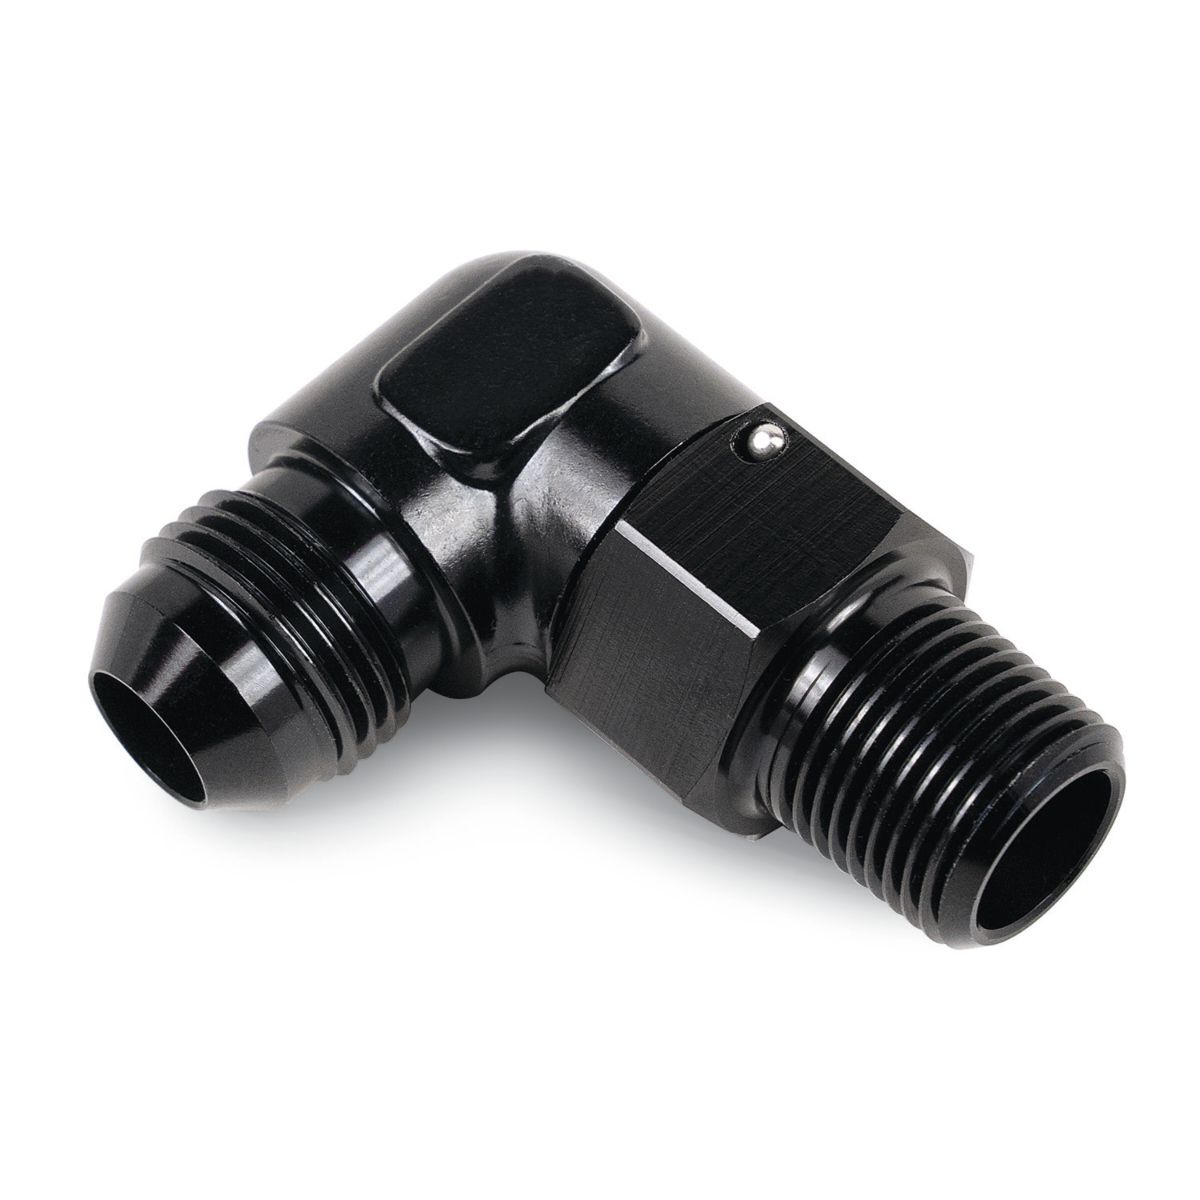 Derale 59706 Fitting, Adapter, 90 Degree, 1/2 in NPT Male to 6 AN Male, Aluminum, Black Anodized, Each